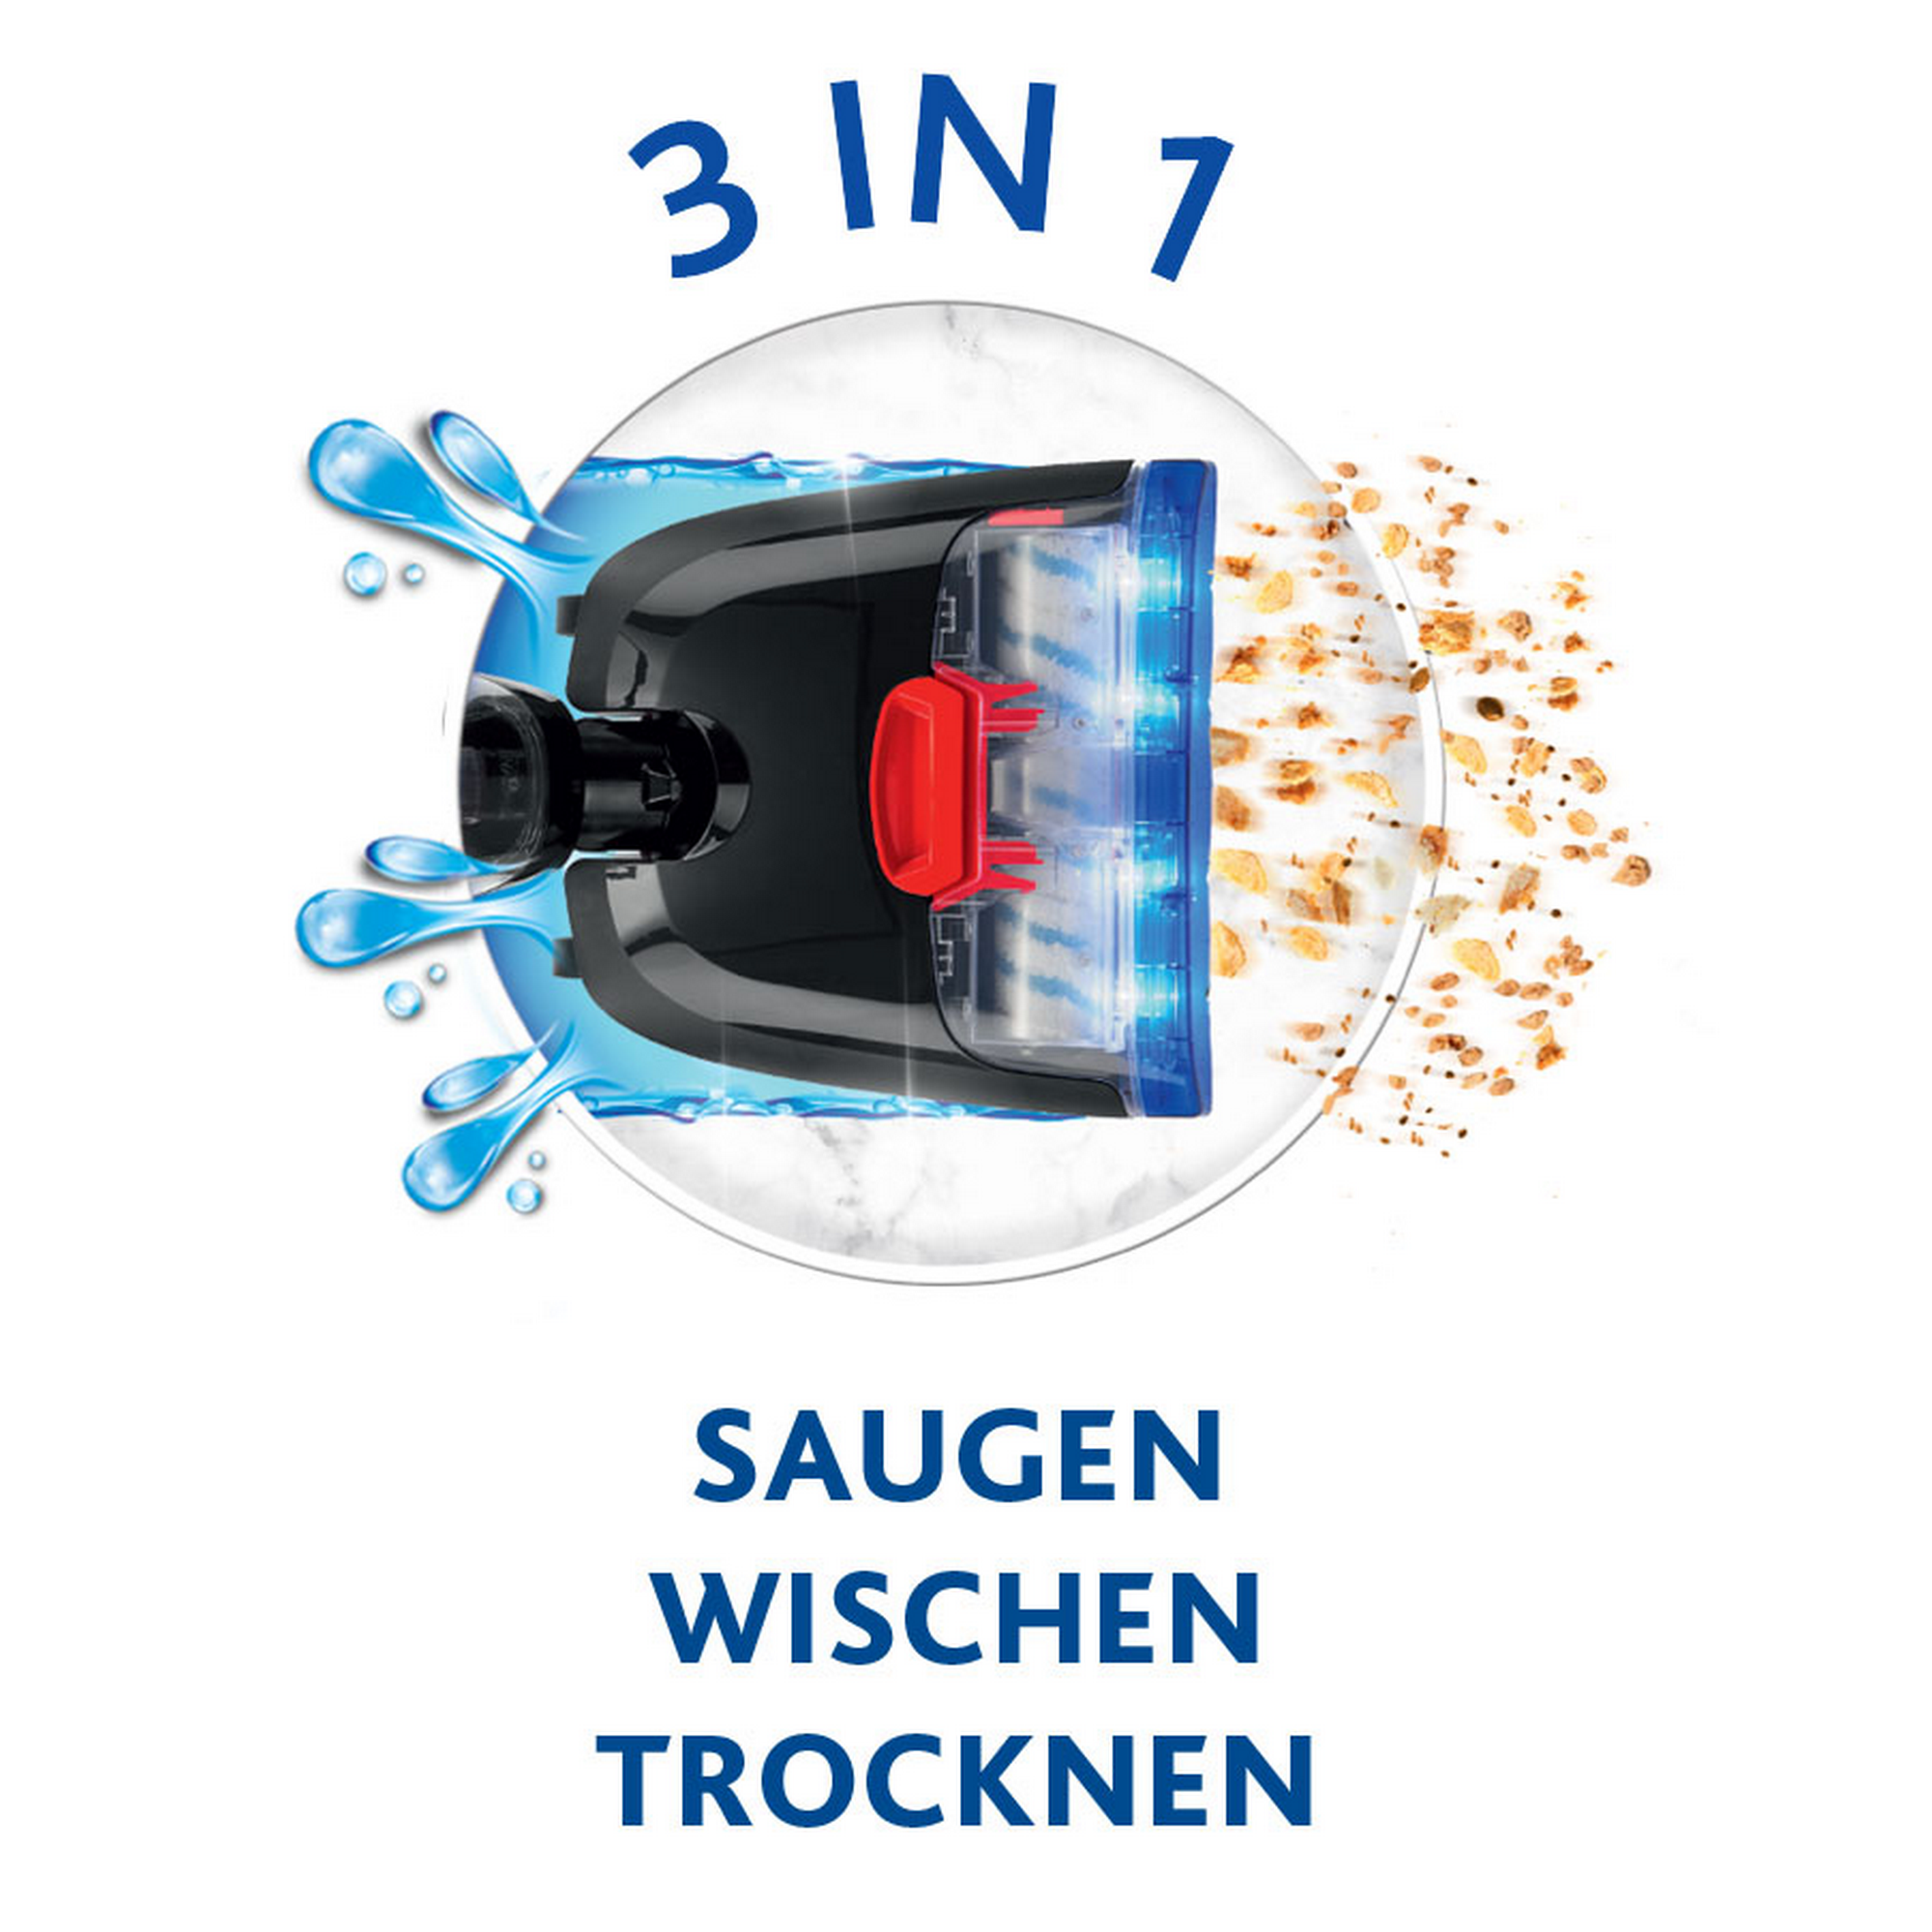 Hartbodenreiniger 'JetClean 3in1' 400 W + product picture